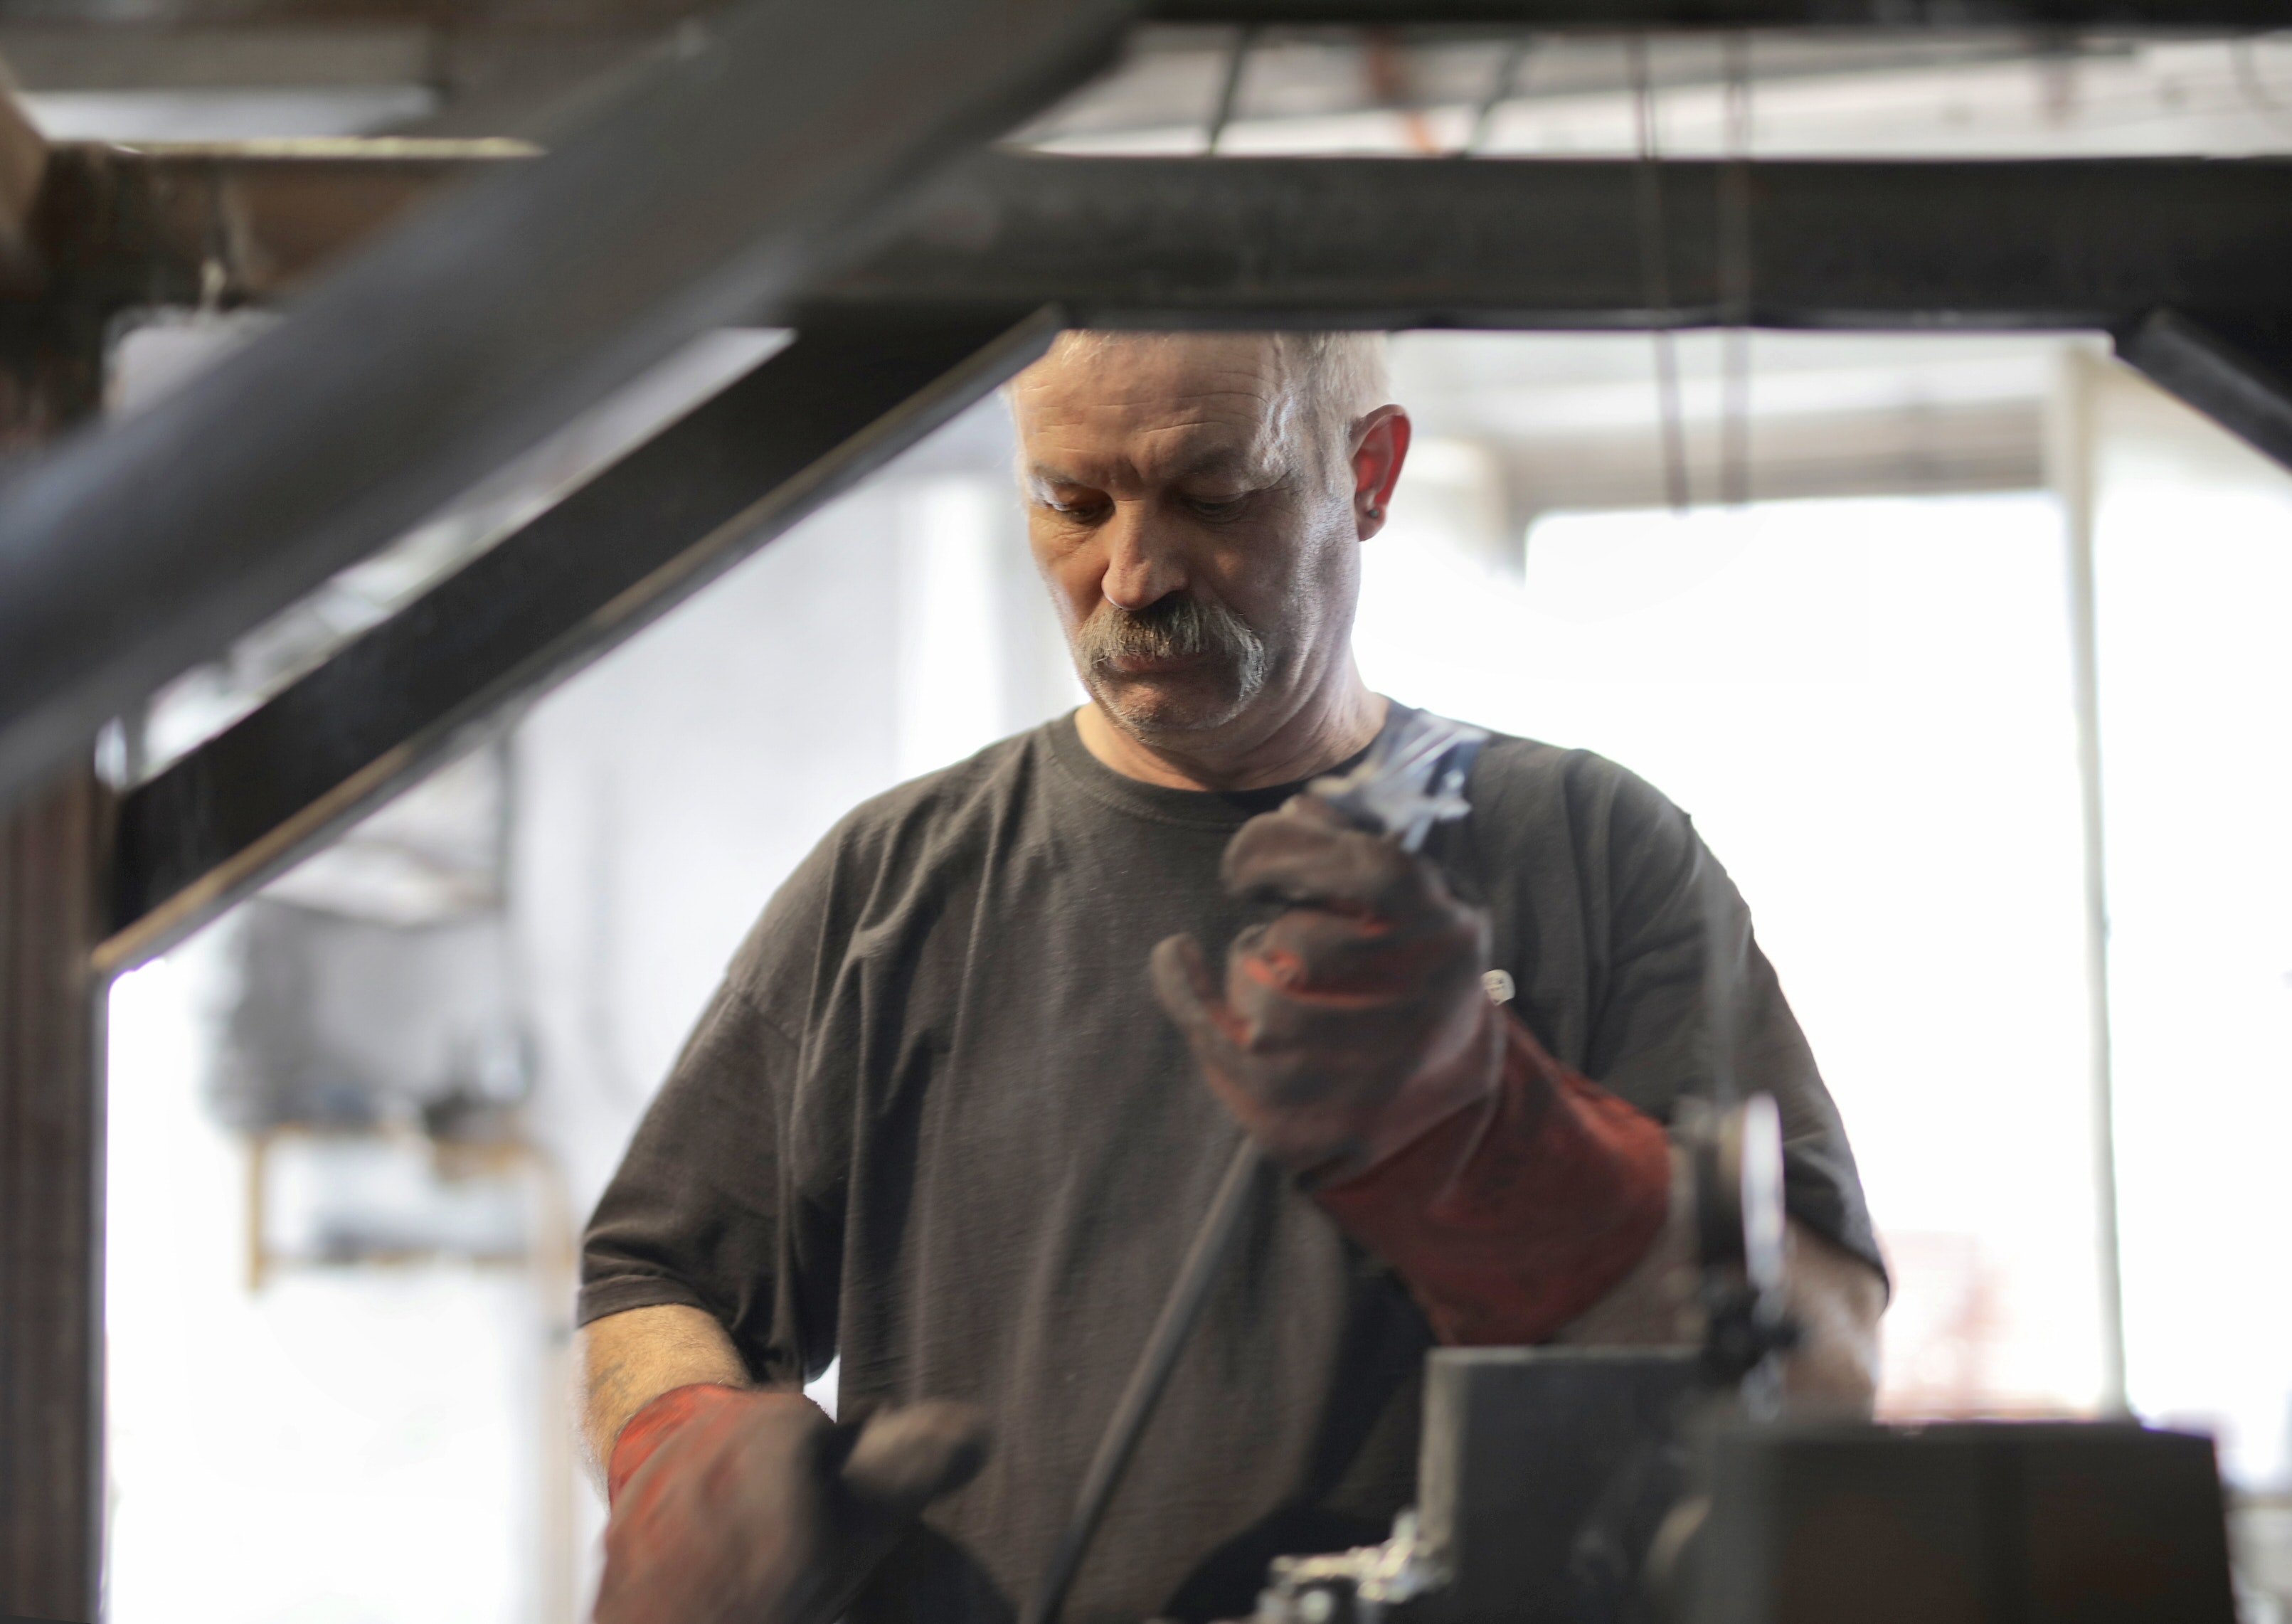 Pictured - An elderly fitter working in a workshop | Source: Pexels 